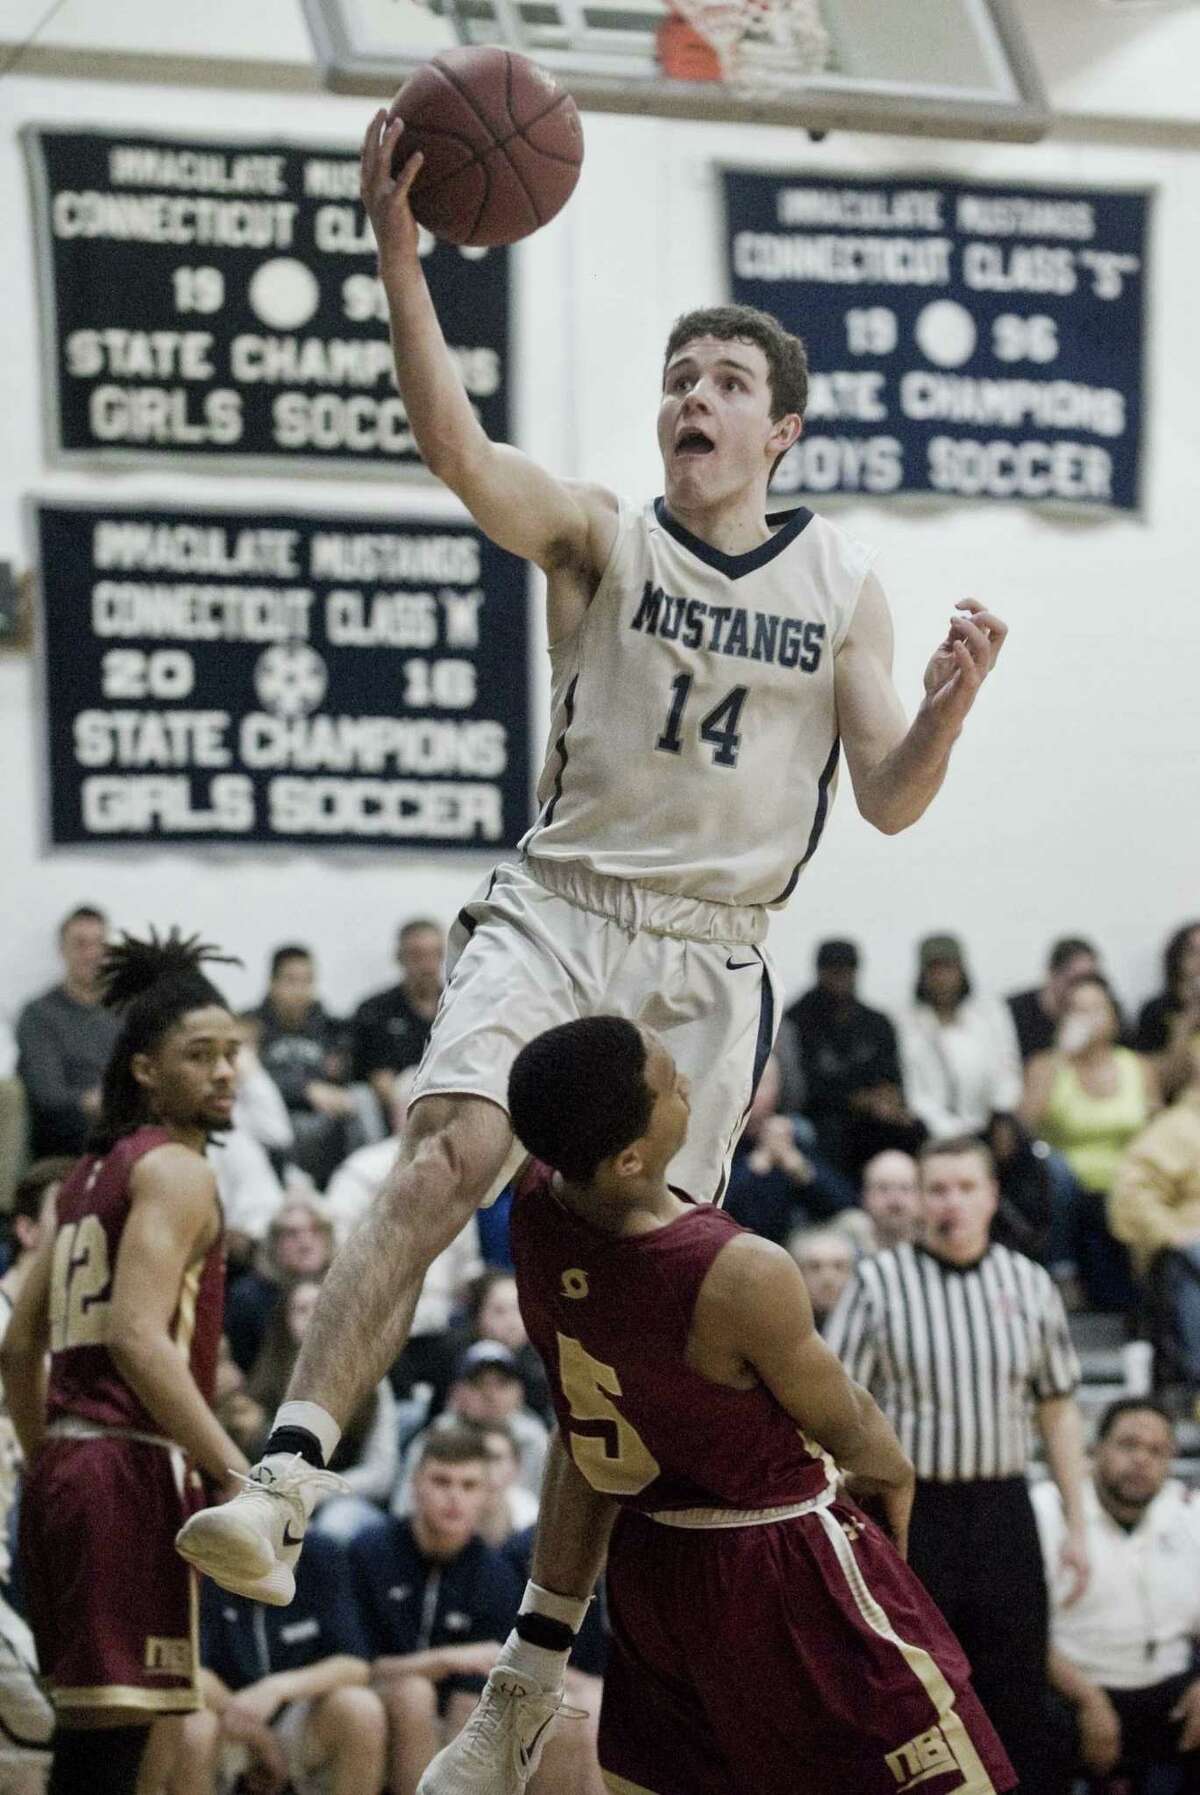 Immaculate High School's Ronan Doherty goes up to the basket in the Division II boys basketball quarterfinals against New Britain High School, played at Immaculate. Monday, March 12, 2018